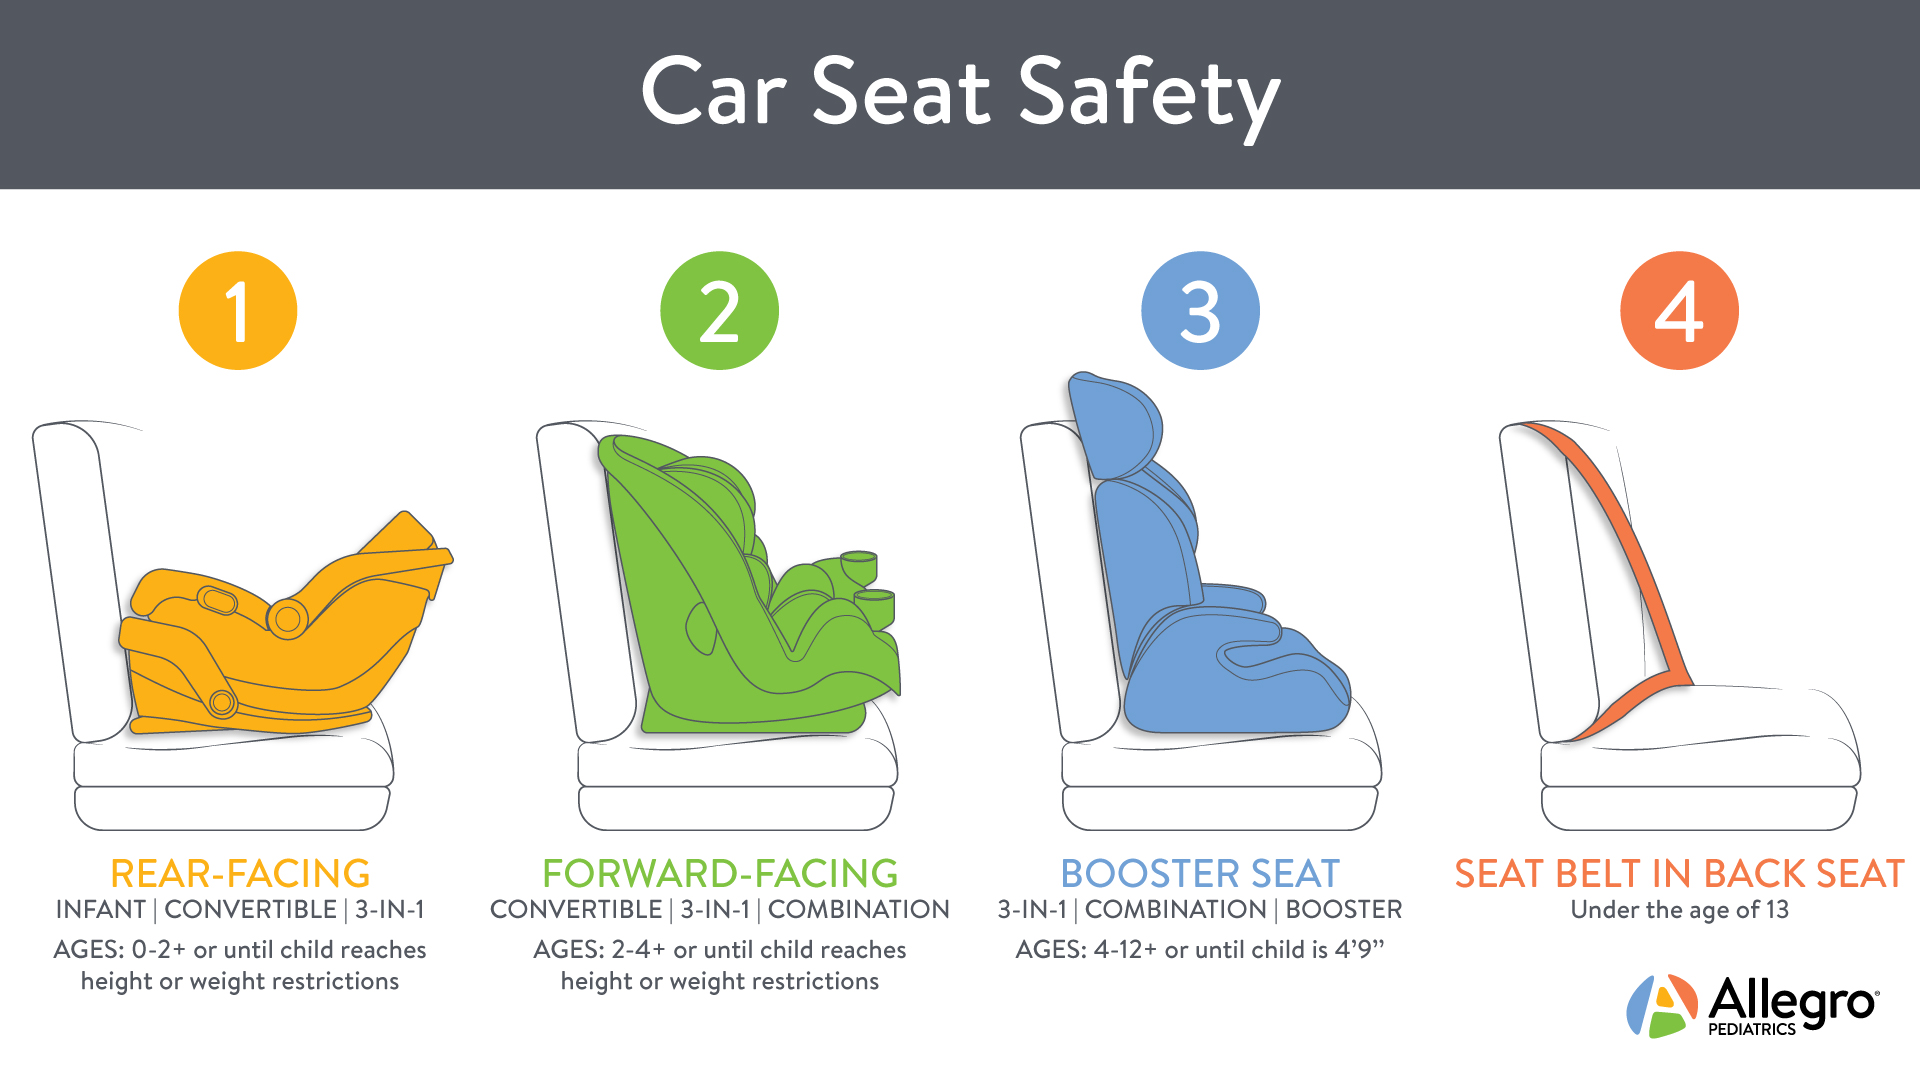 recommended age for forward facing car seat